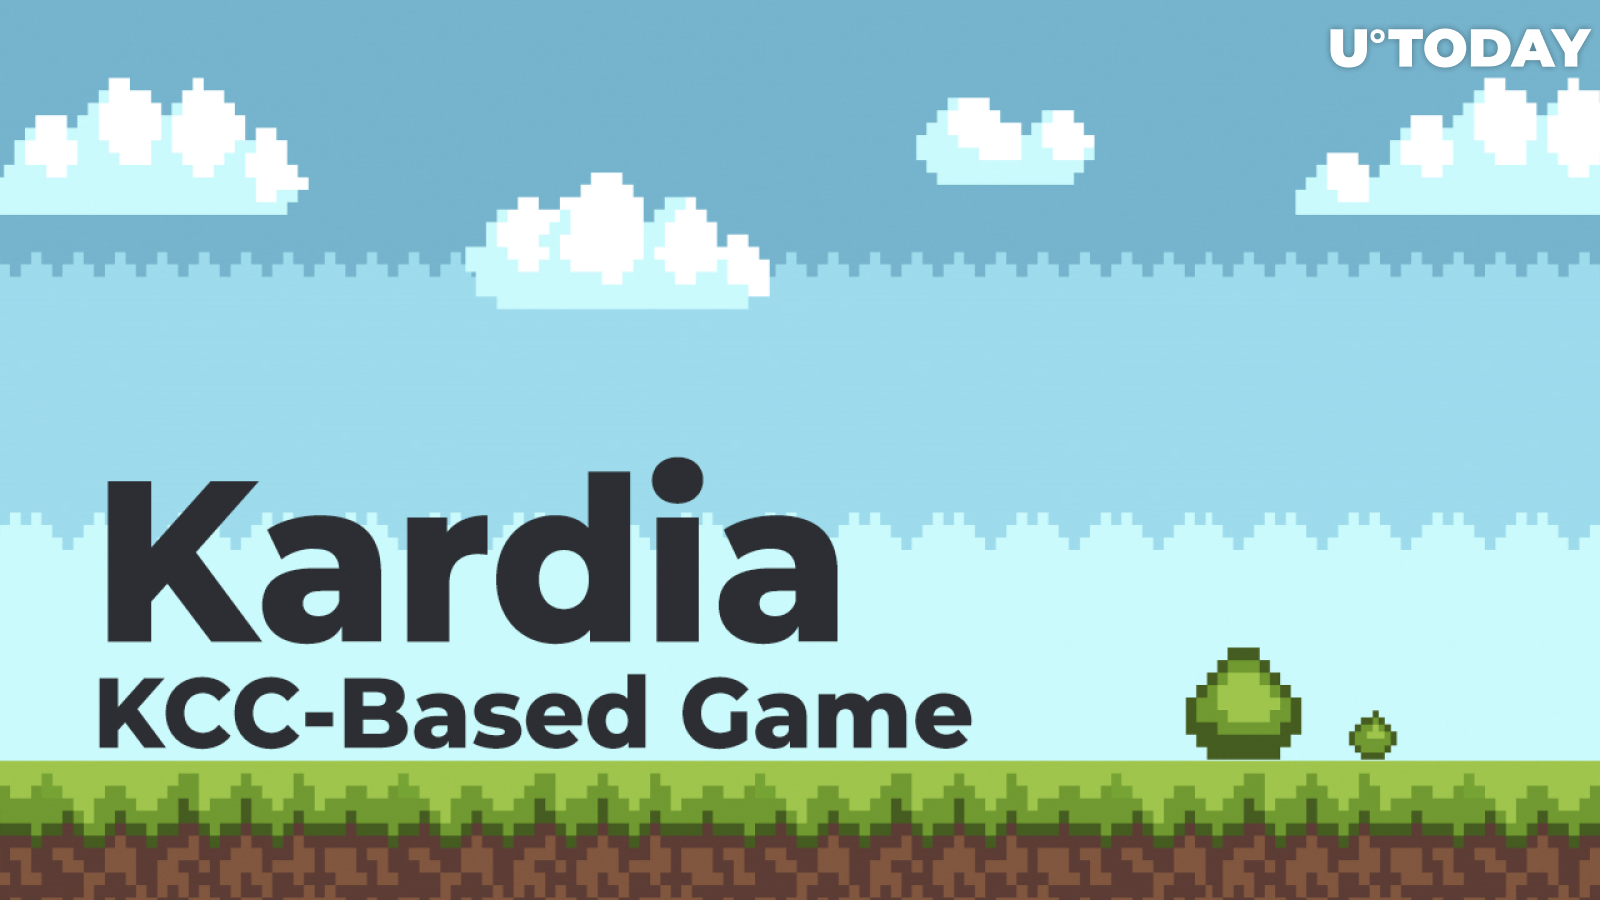 Kardia KCC-Based Game Shares Details of Its Play-to-Earn Design